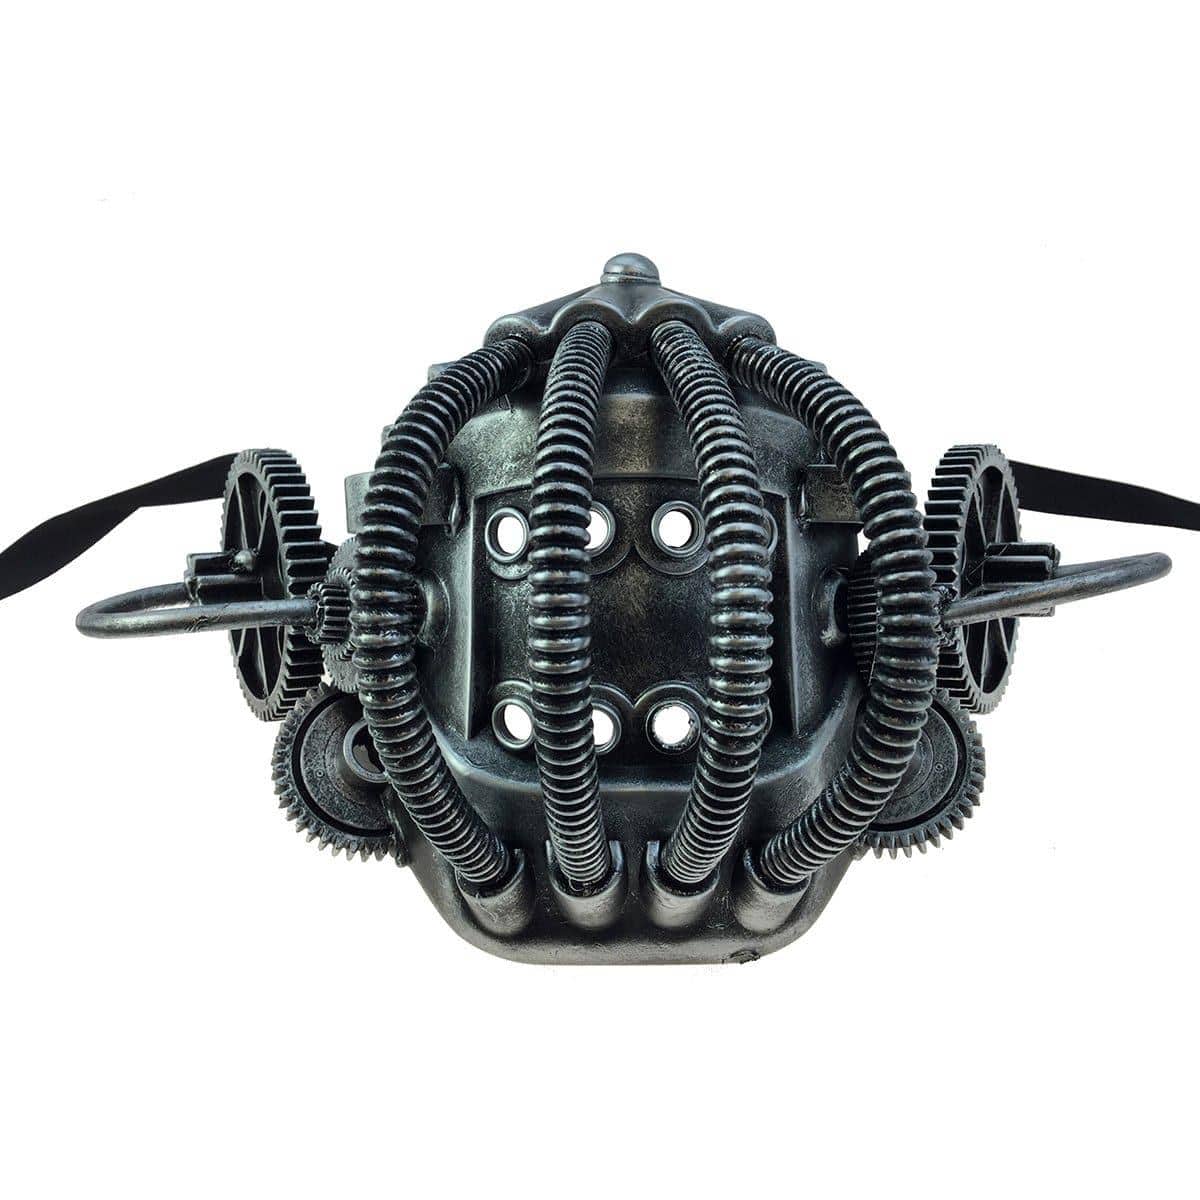 Buy Costume Accessories Silver steampunk gas mask sold at Party Expert